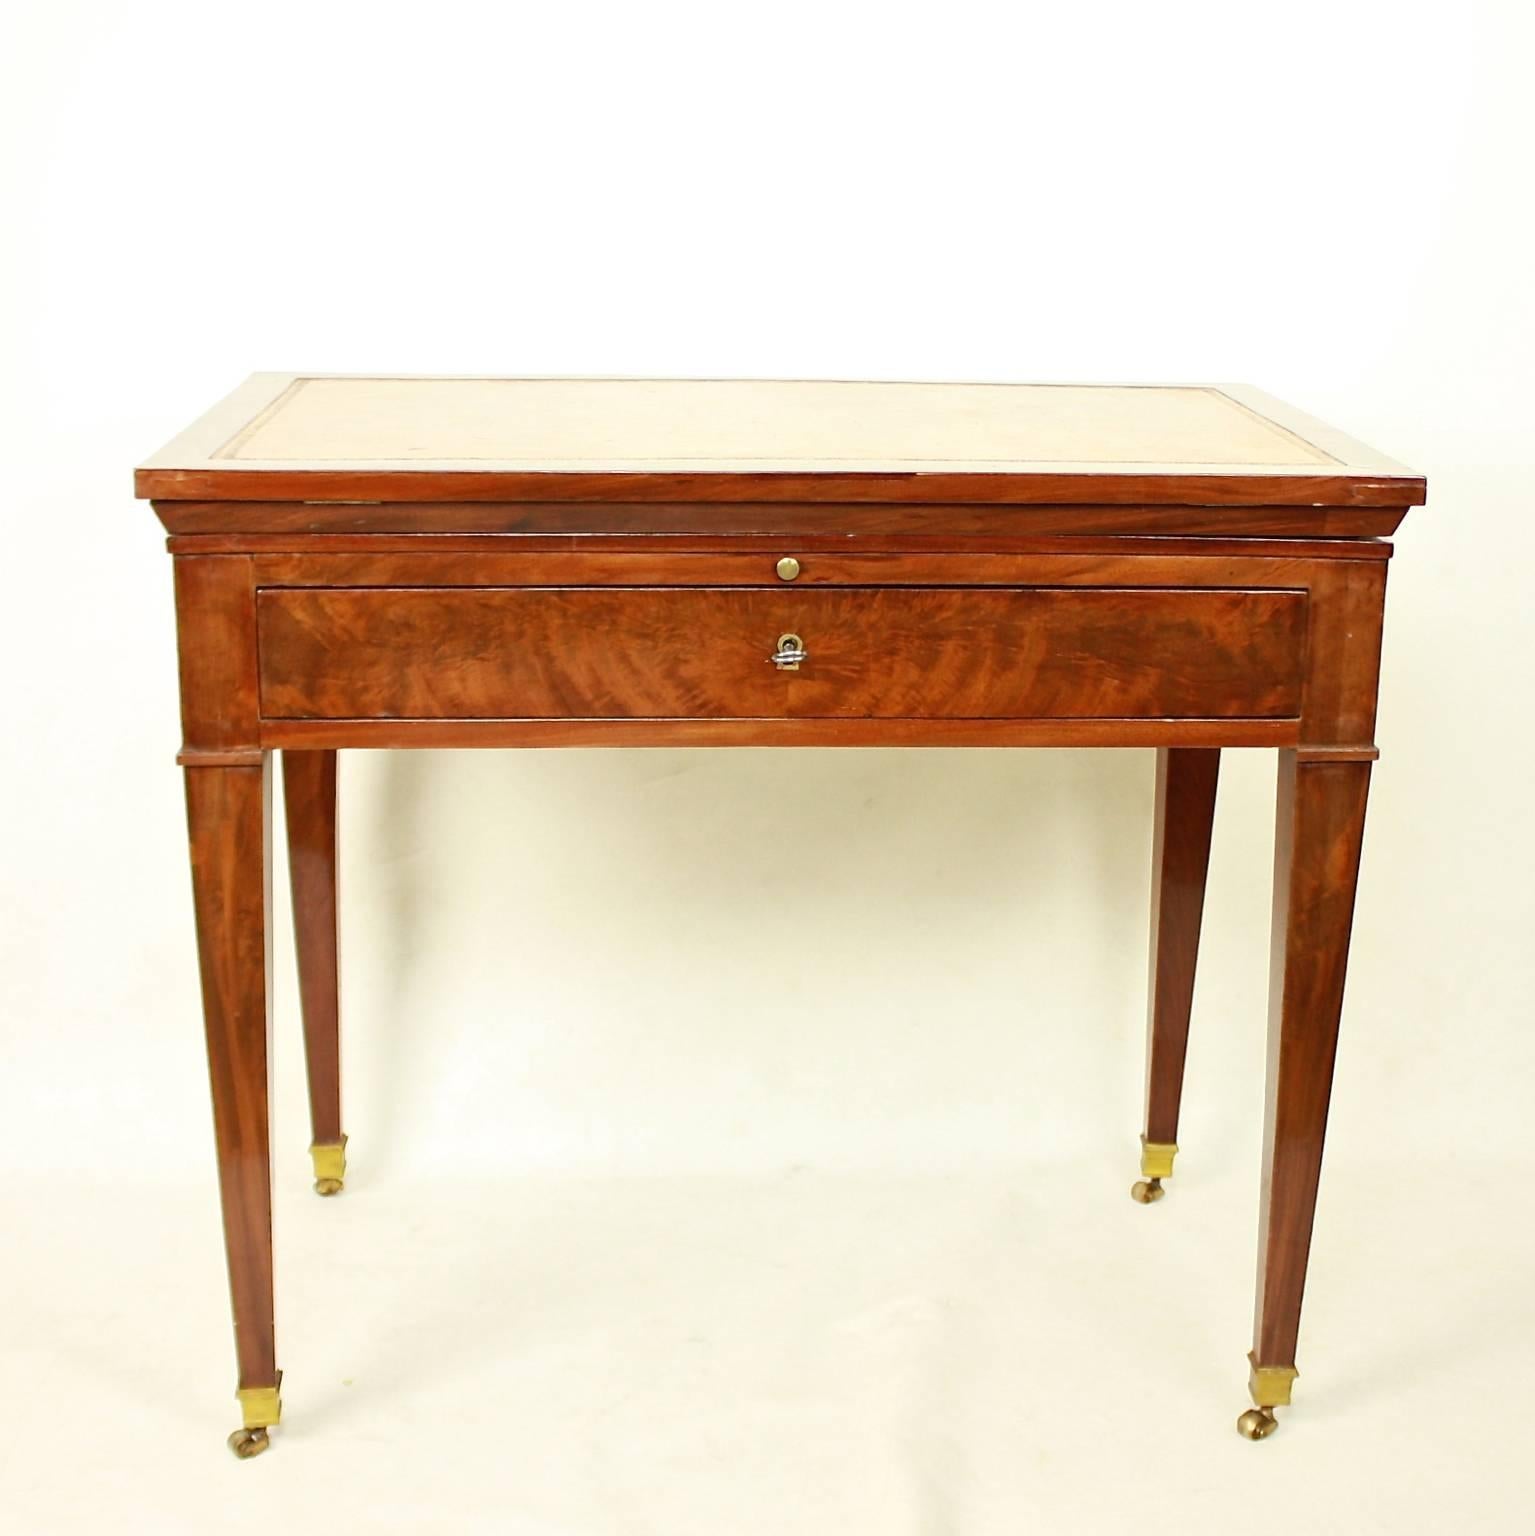 A late 18th century Directoire mahogany architect's table. A mechanical table with a double-hinged ratcheted top and the original gold-tooled brown leather lined writing surface, veneered in beautifully, if rather pale, flame-grained polished